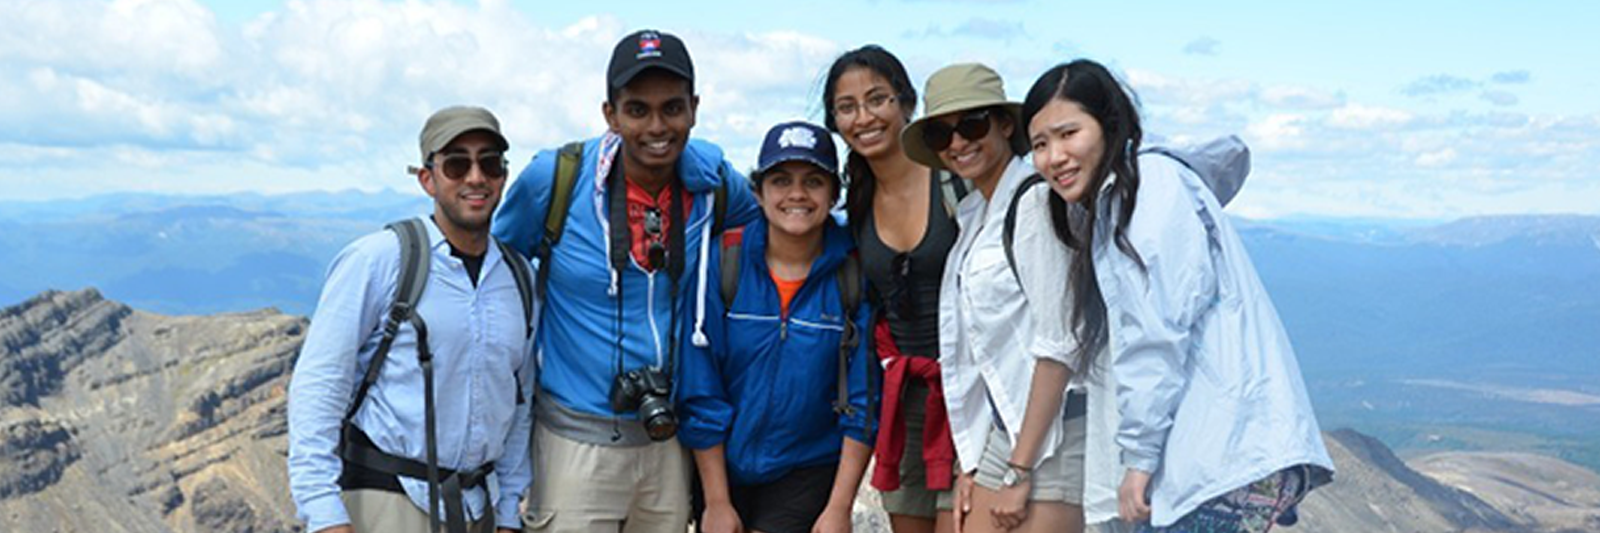 Students on mountain top